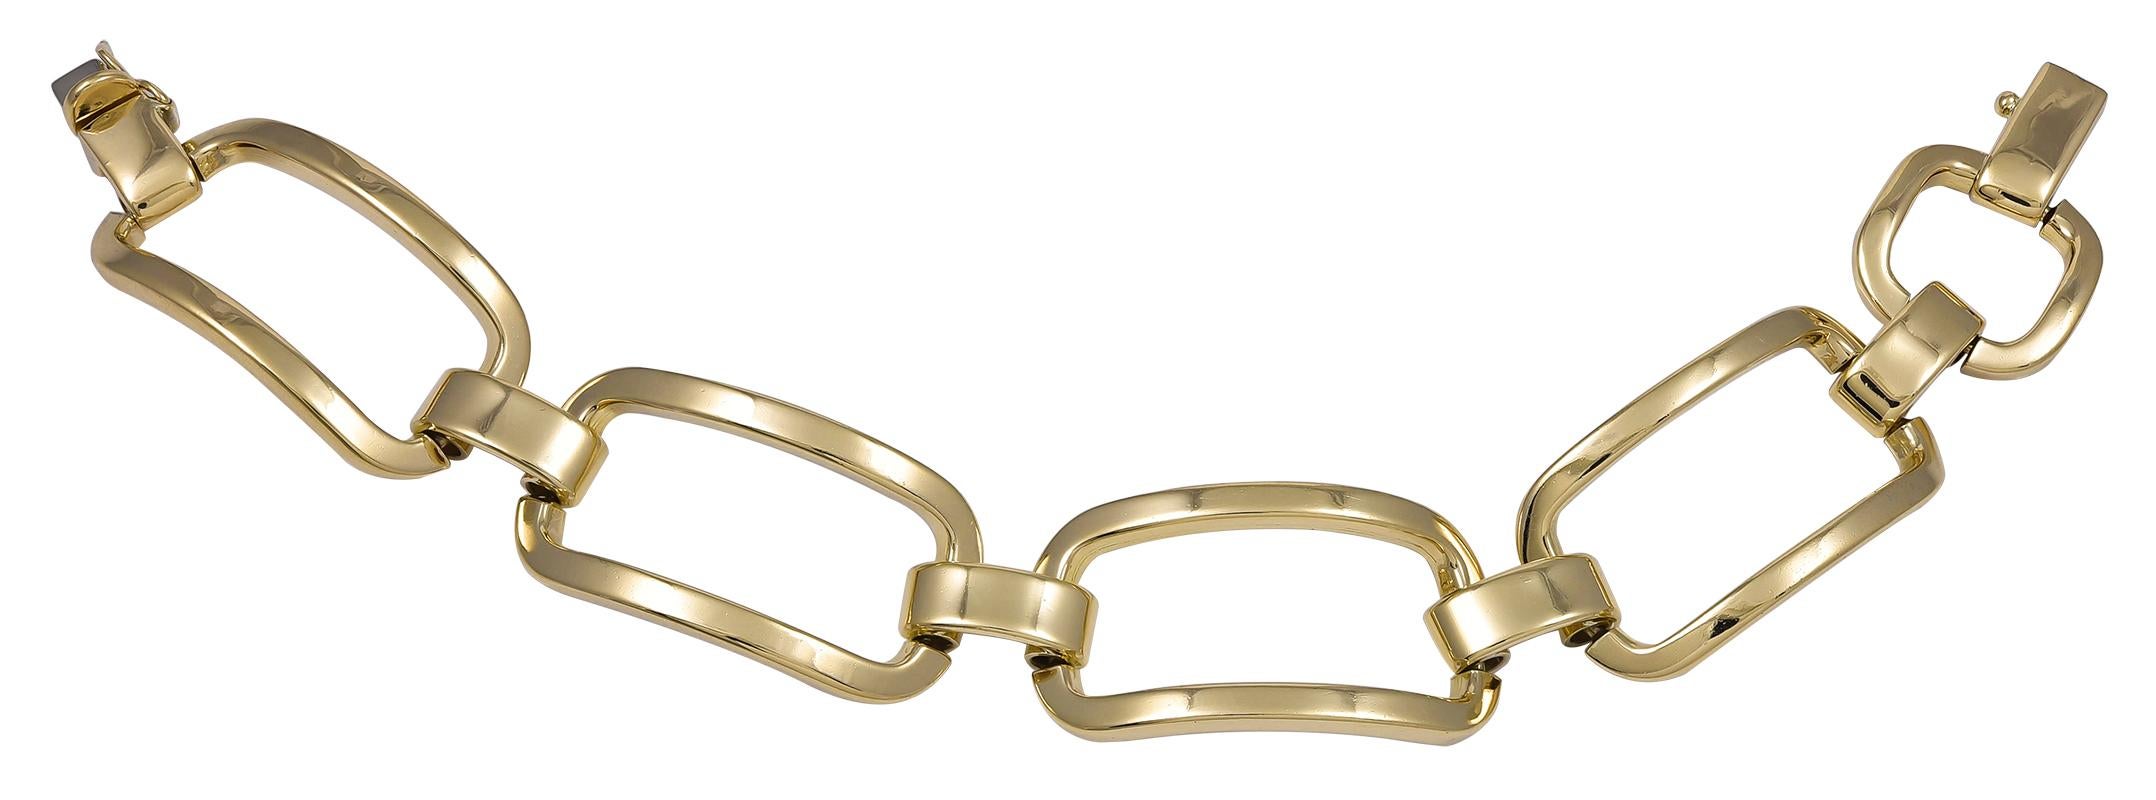 Very attractive and wearable bracelet, with curved elongated rectangular links.  Made and signed by TIFFANY & CO. 
18K yellow gold.  6 3/4